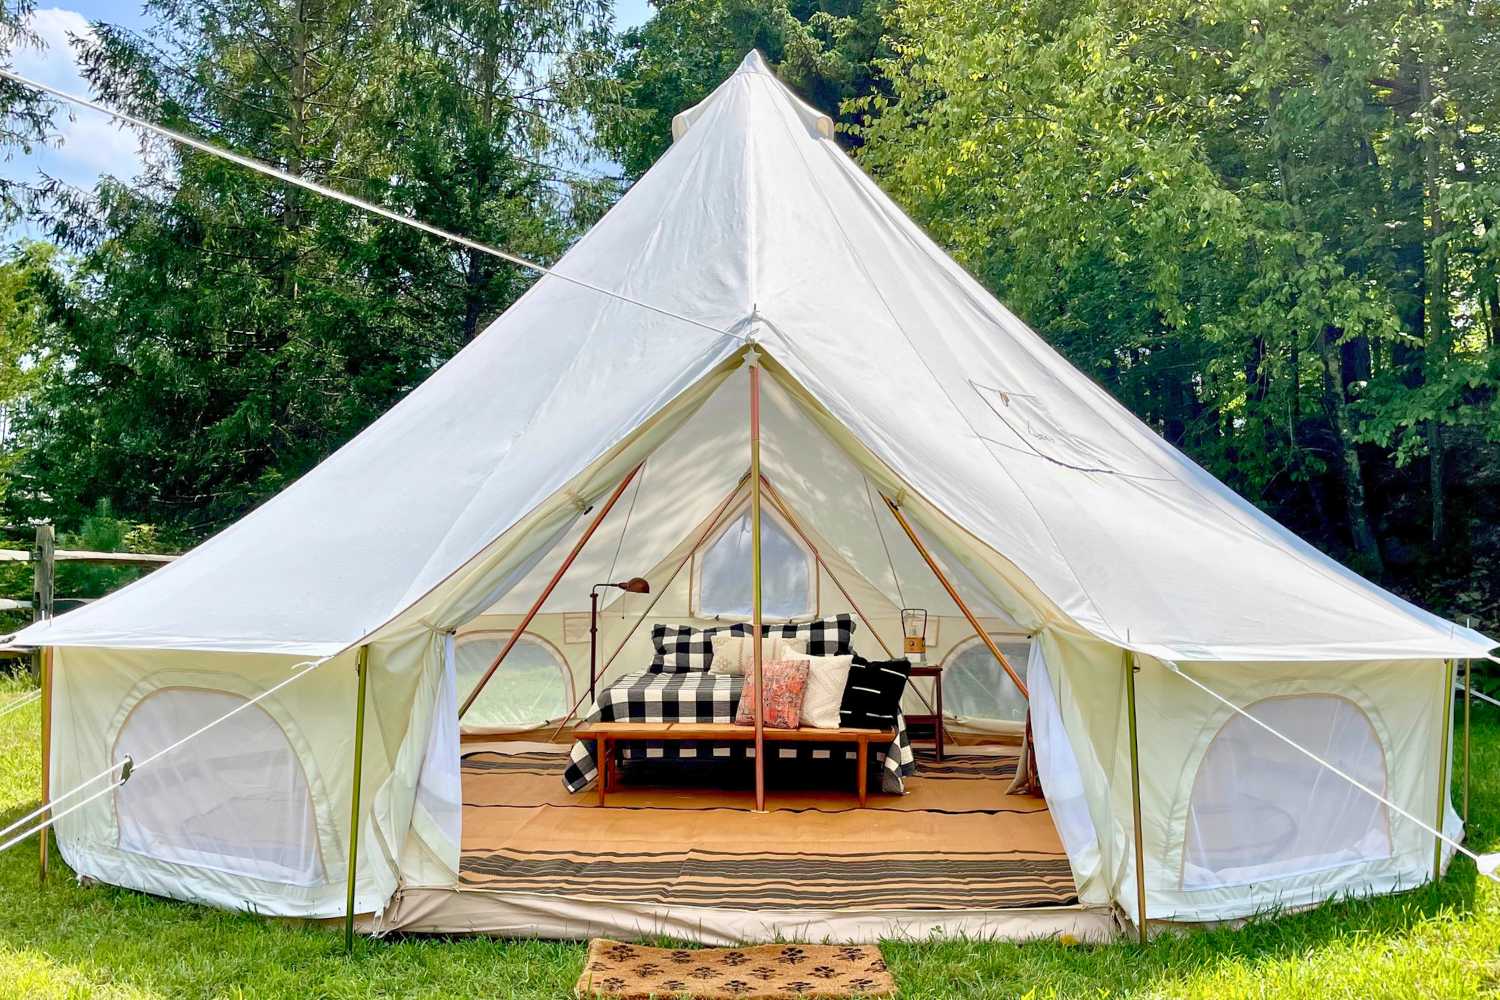 Yurt Tents For Sale | Shop Glamping Yurts - Life inTents